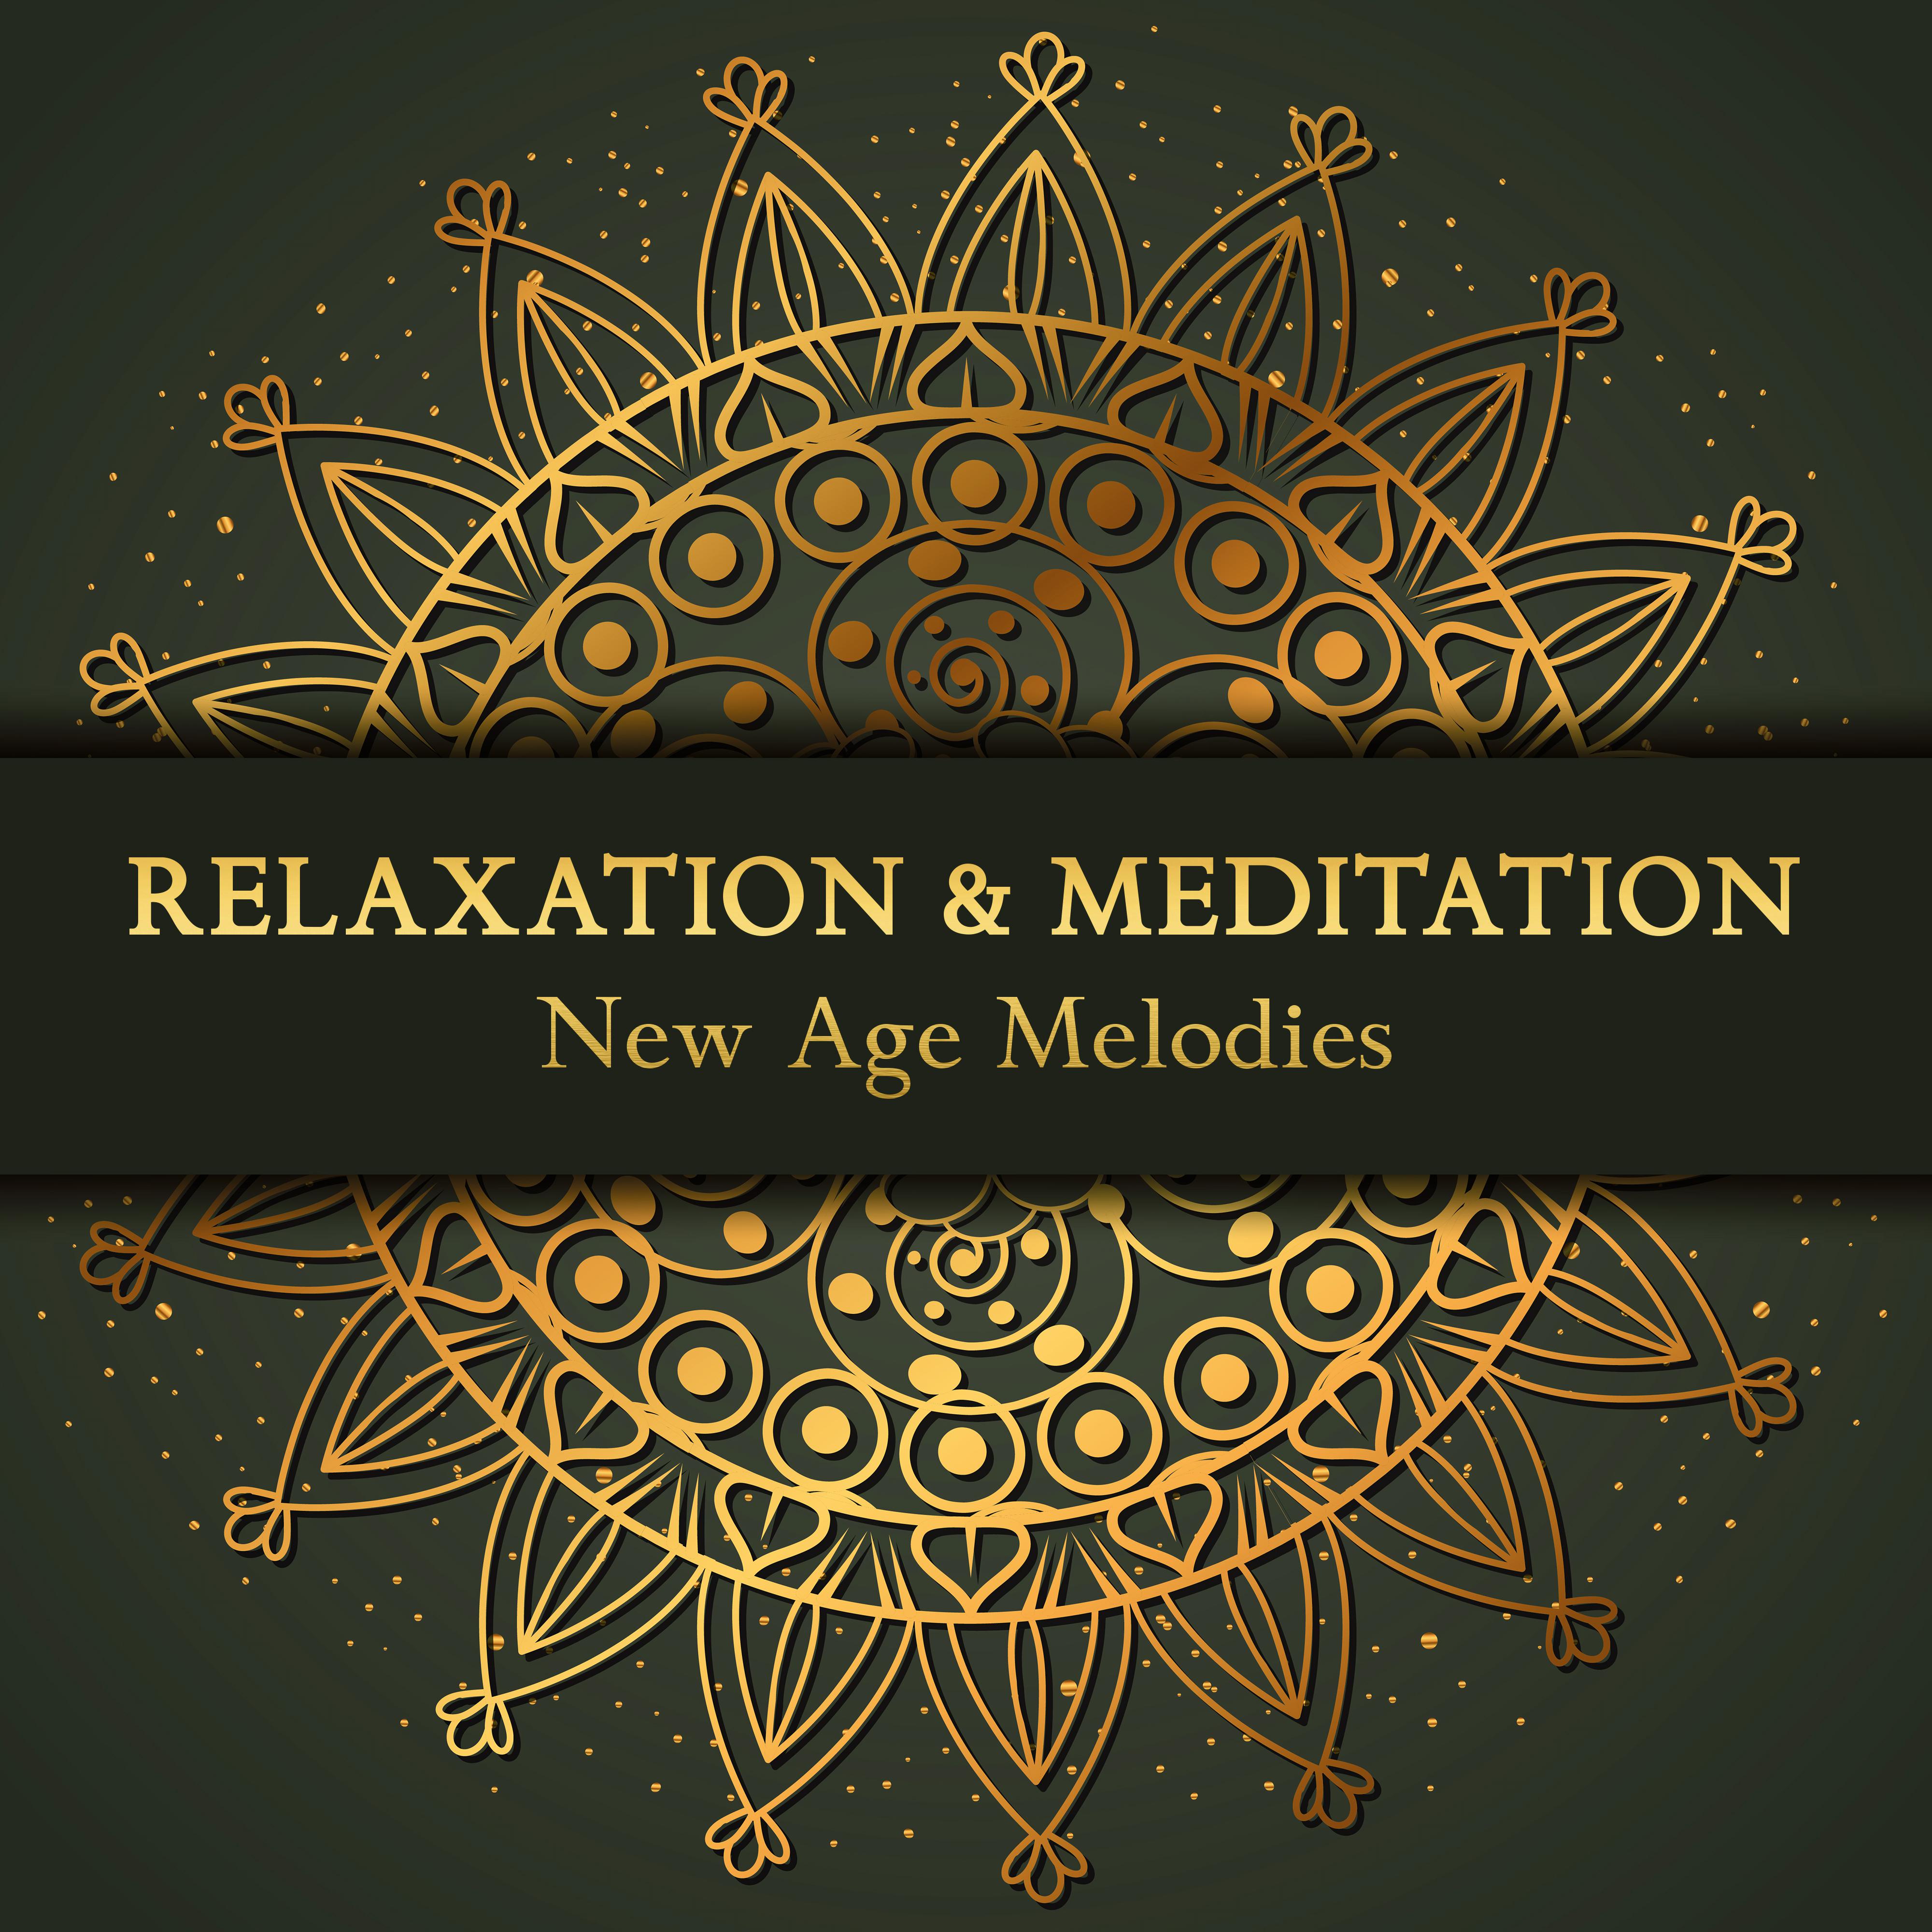 Relaxation & Meditation New Age Melodies